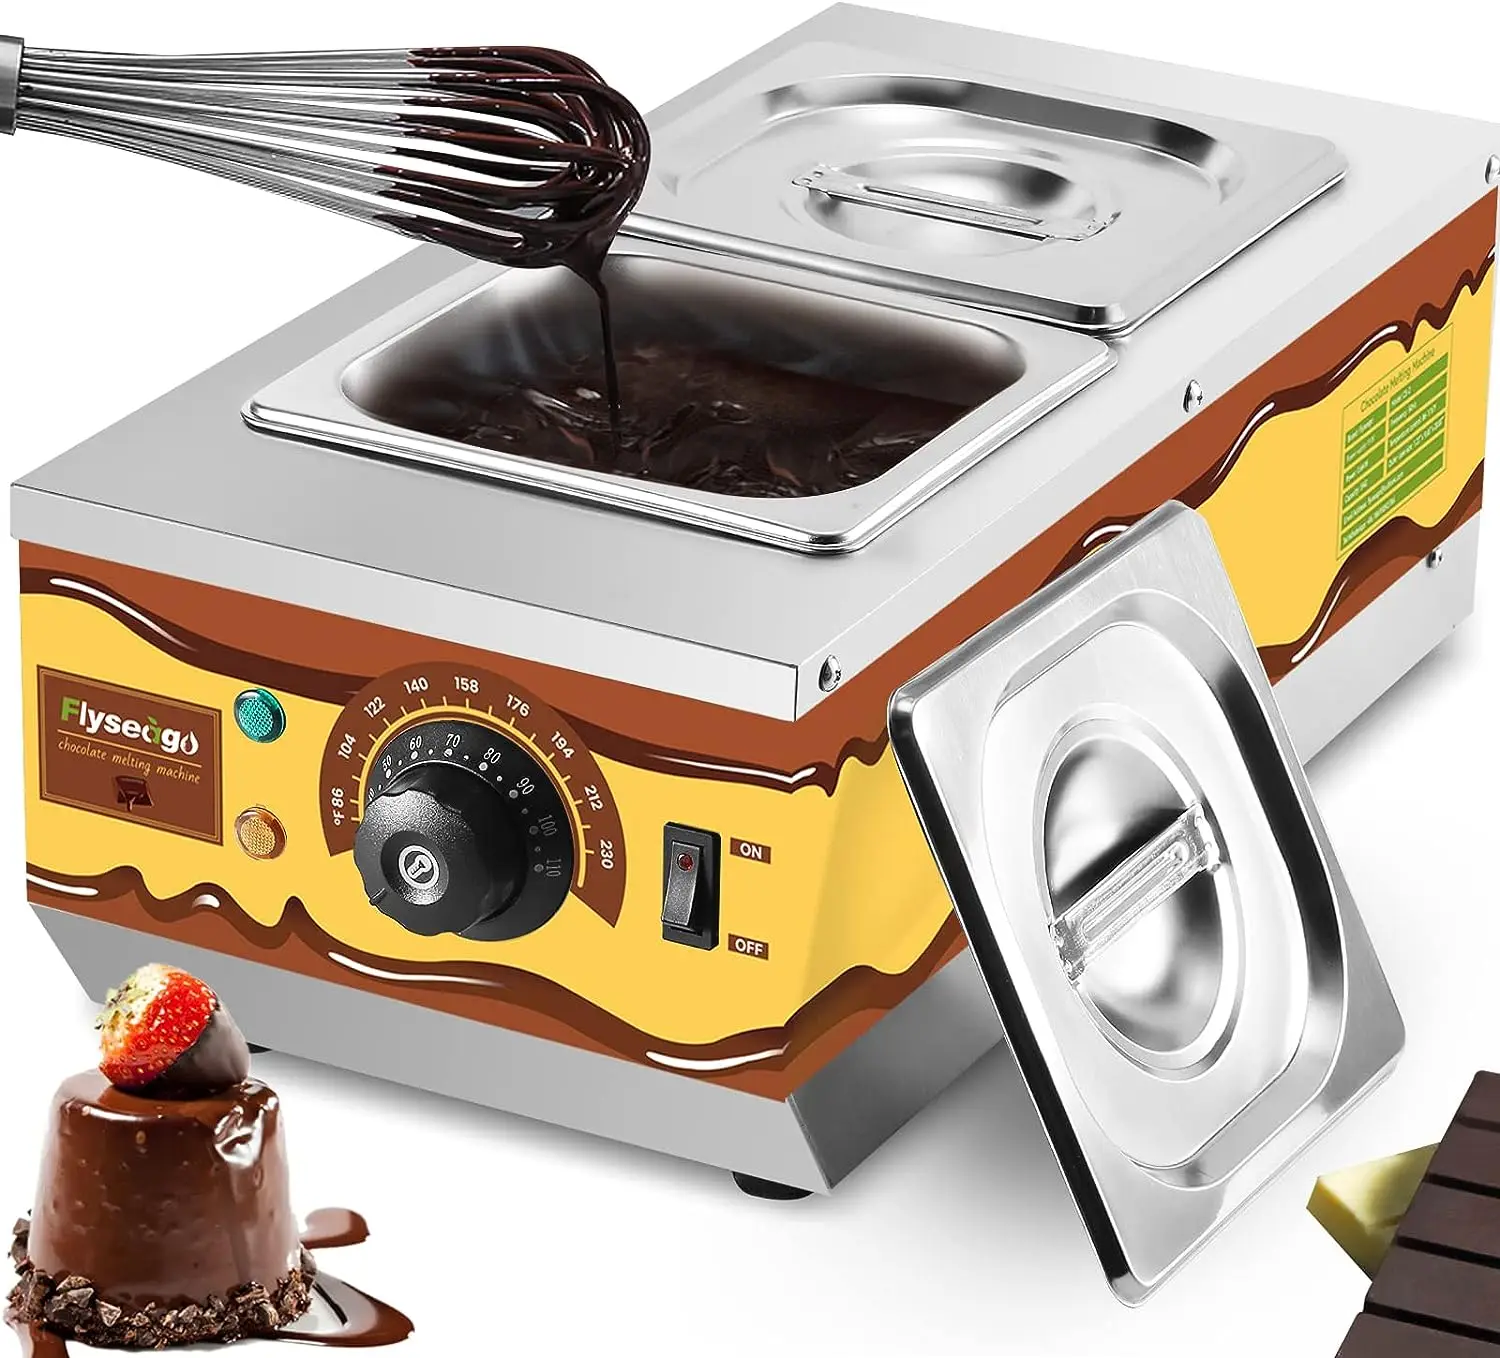 

Chocolate Tempering Machine Upgrade Commercial Home Use Hot Melting Pot Manual Control 9lbs 2 Tanks Capacity Adjustable Temperat